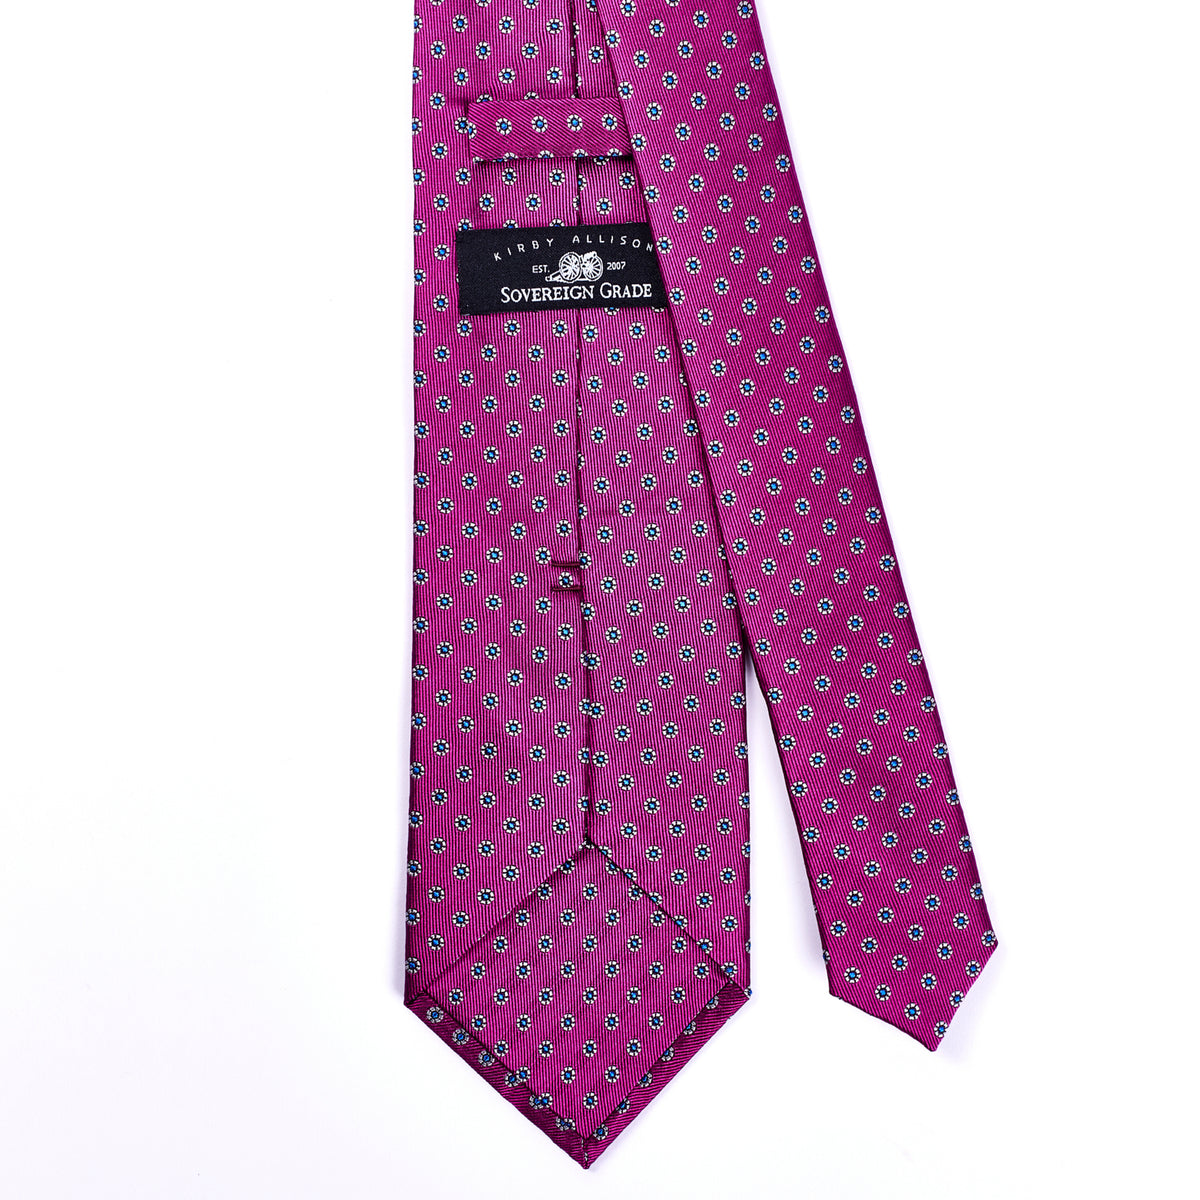 A Sovereign Grade Fuchsia Floral Jacquard tie, 150 cm, from KirbyAllison.com with a pink and blue pattern on a white background.